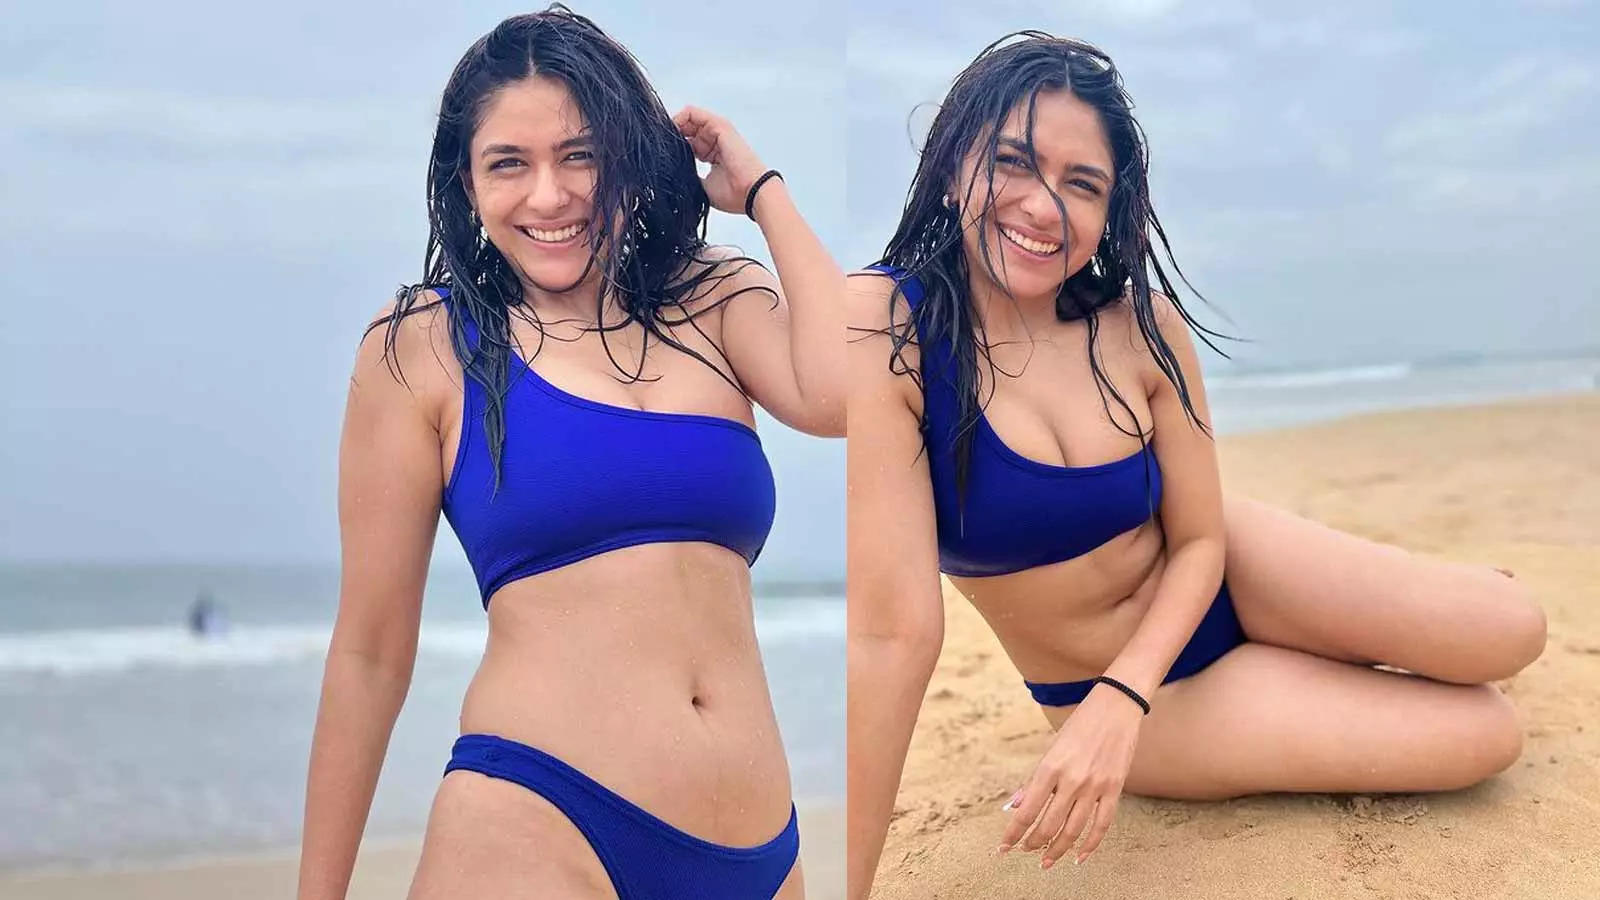 Mrunal Thakur Bikini Photo, Images, Pictures, Video Mrunal Thakur shares bikini photos from her beach vacation; fans say This is not our Sita  pic pic